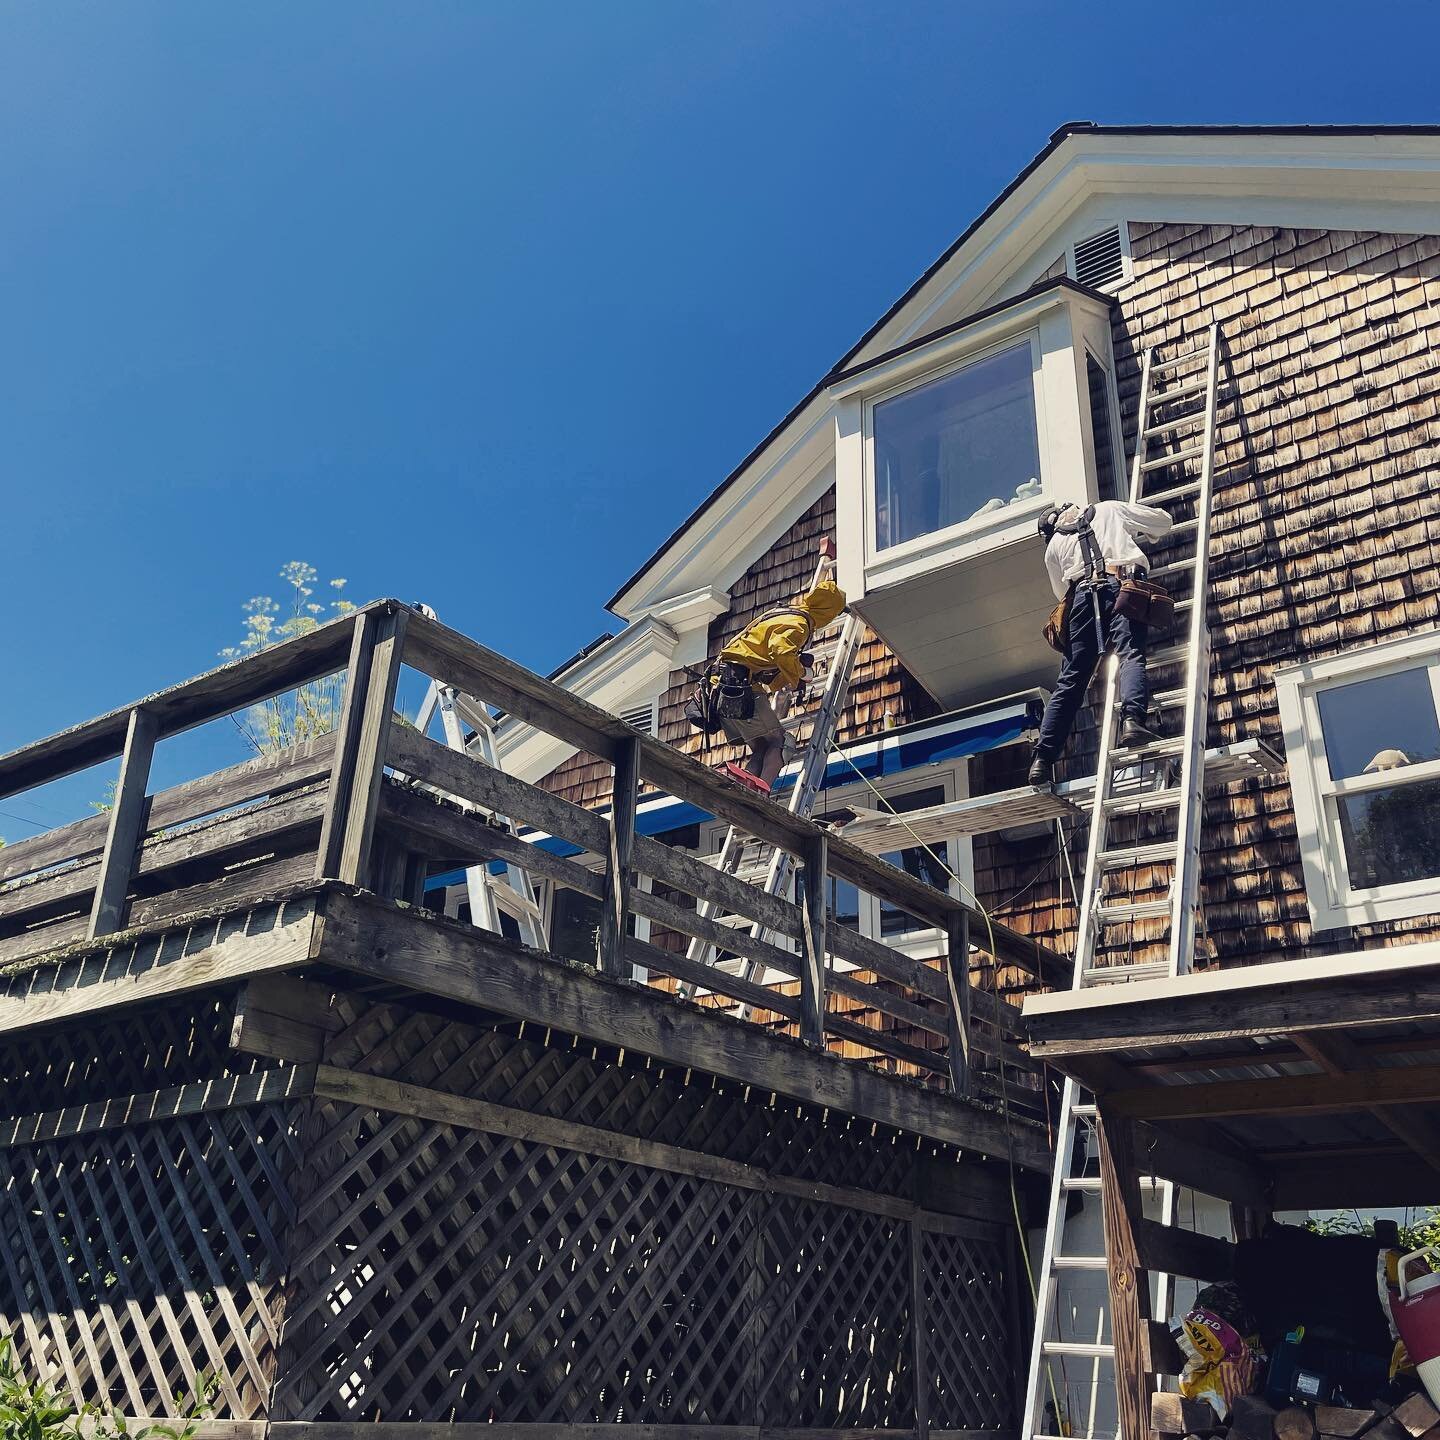 Another short, hot, south-facing job. Framing, trim, and siding repairs to a high bay window. Add challenging angles, challenging site access, and challenging hornets to challenging heat, and somehow you&rsquo;ll still come up with a job well done wh